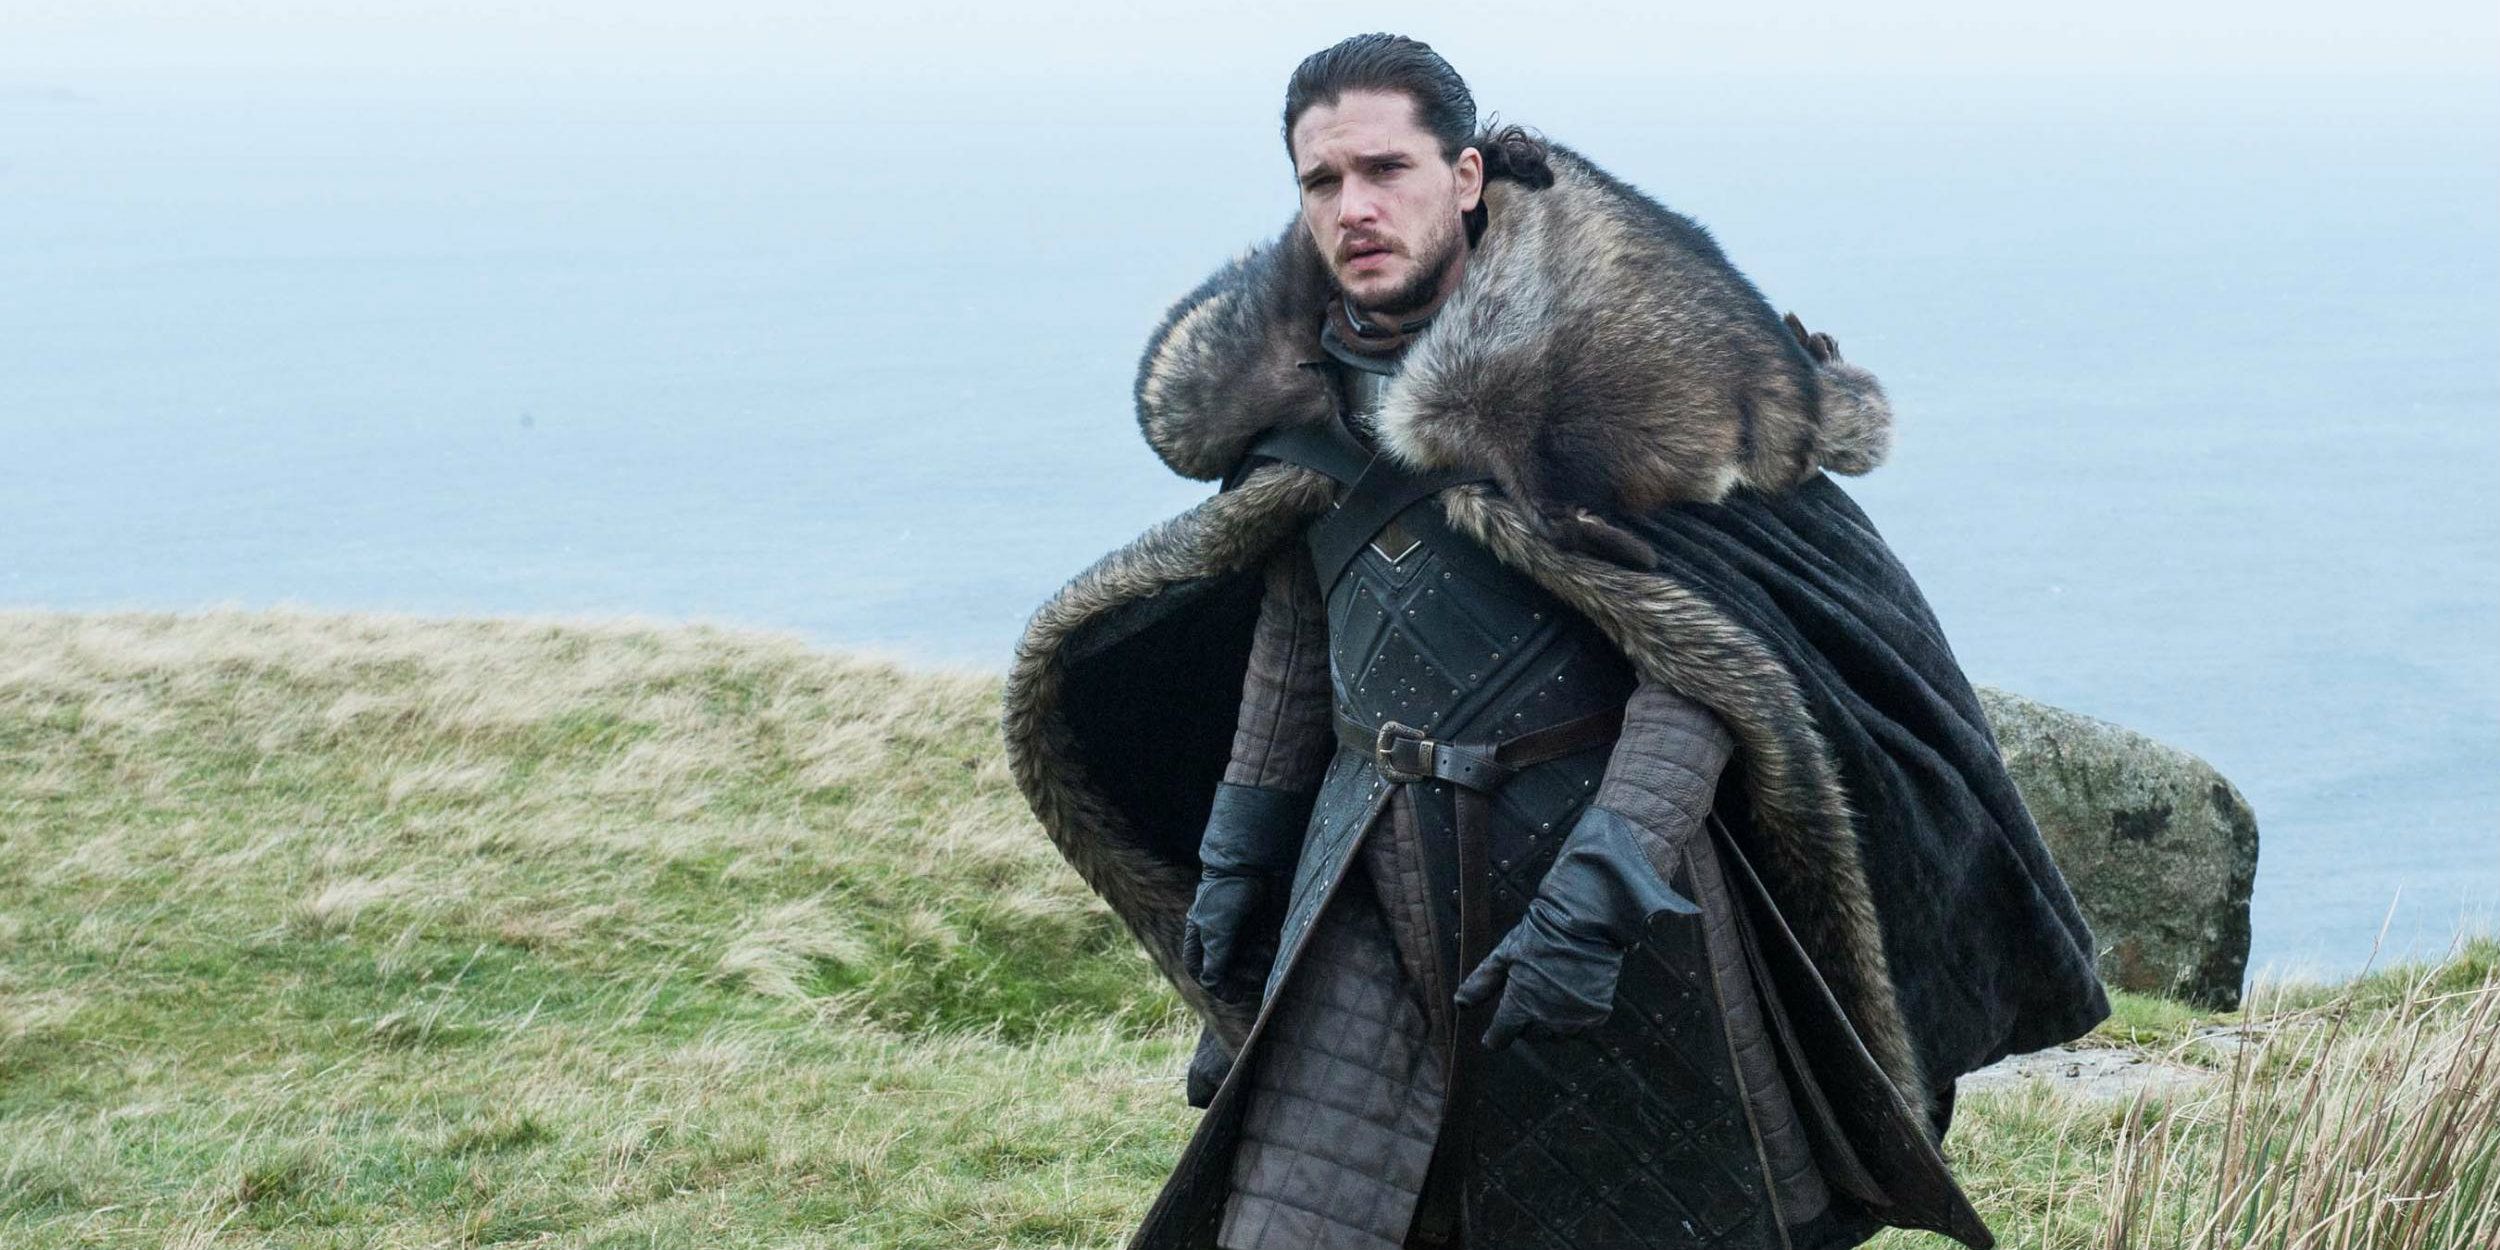 Jon Snow walking atop a cliff in Game of Thrones.